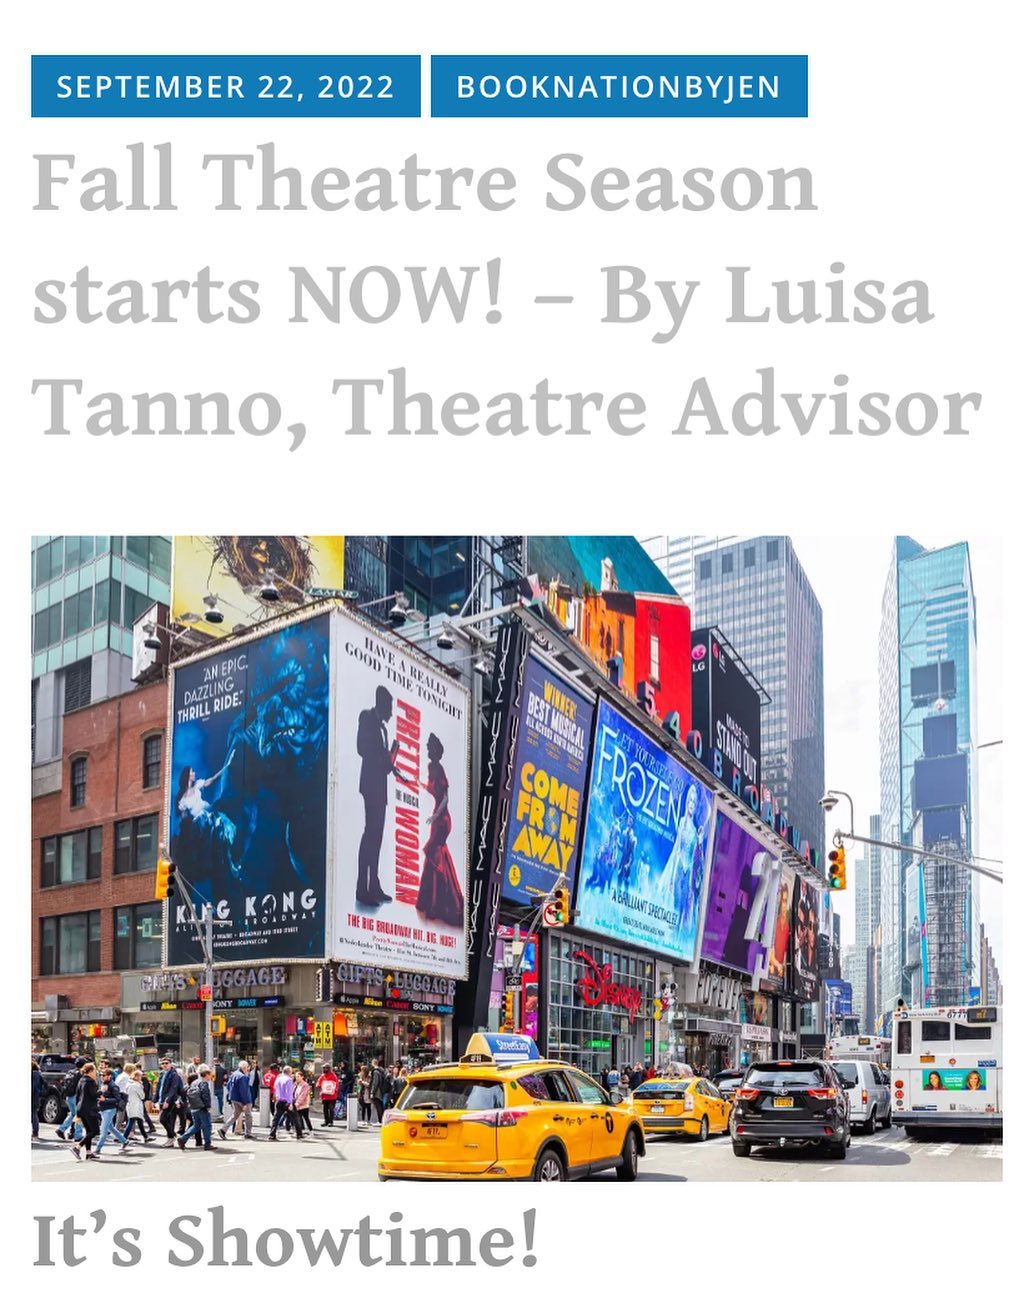 Ok! Here is my personal list of shows to see for the Fall! I’m already making additions 😬 ! Thank you to all the theatre makers out there for your talent and perseverance! There is A LOT to see. What’s on your list?? Link in bio #broadway #offbroadway #nonprofittheatre #theatre #theatretosee #nyctheatre #theatreblog Thank you @booknationbyjen for letting me wax theatrical on your fabulous #bookblog !!